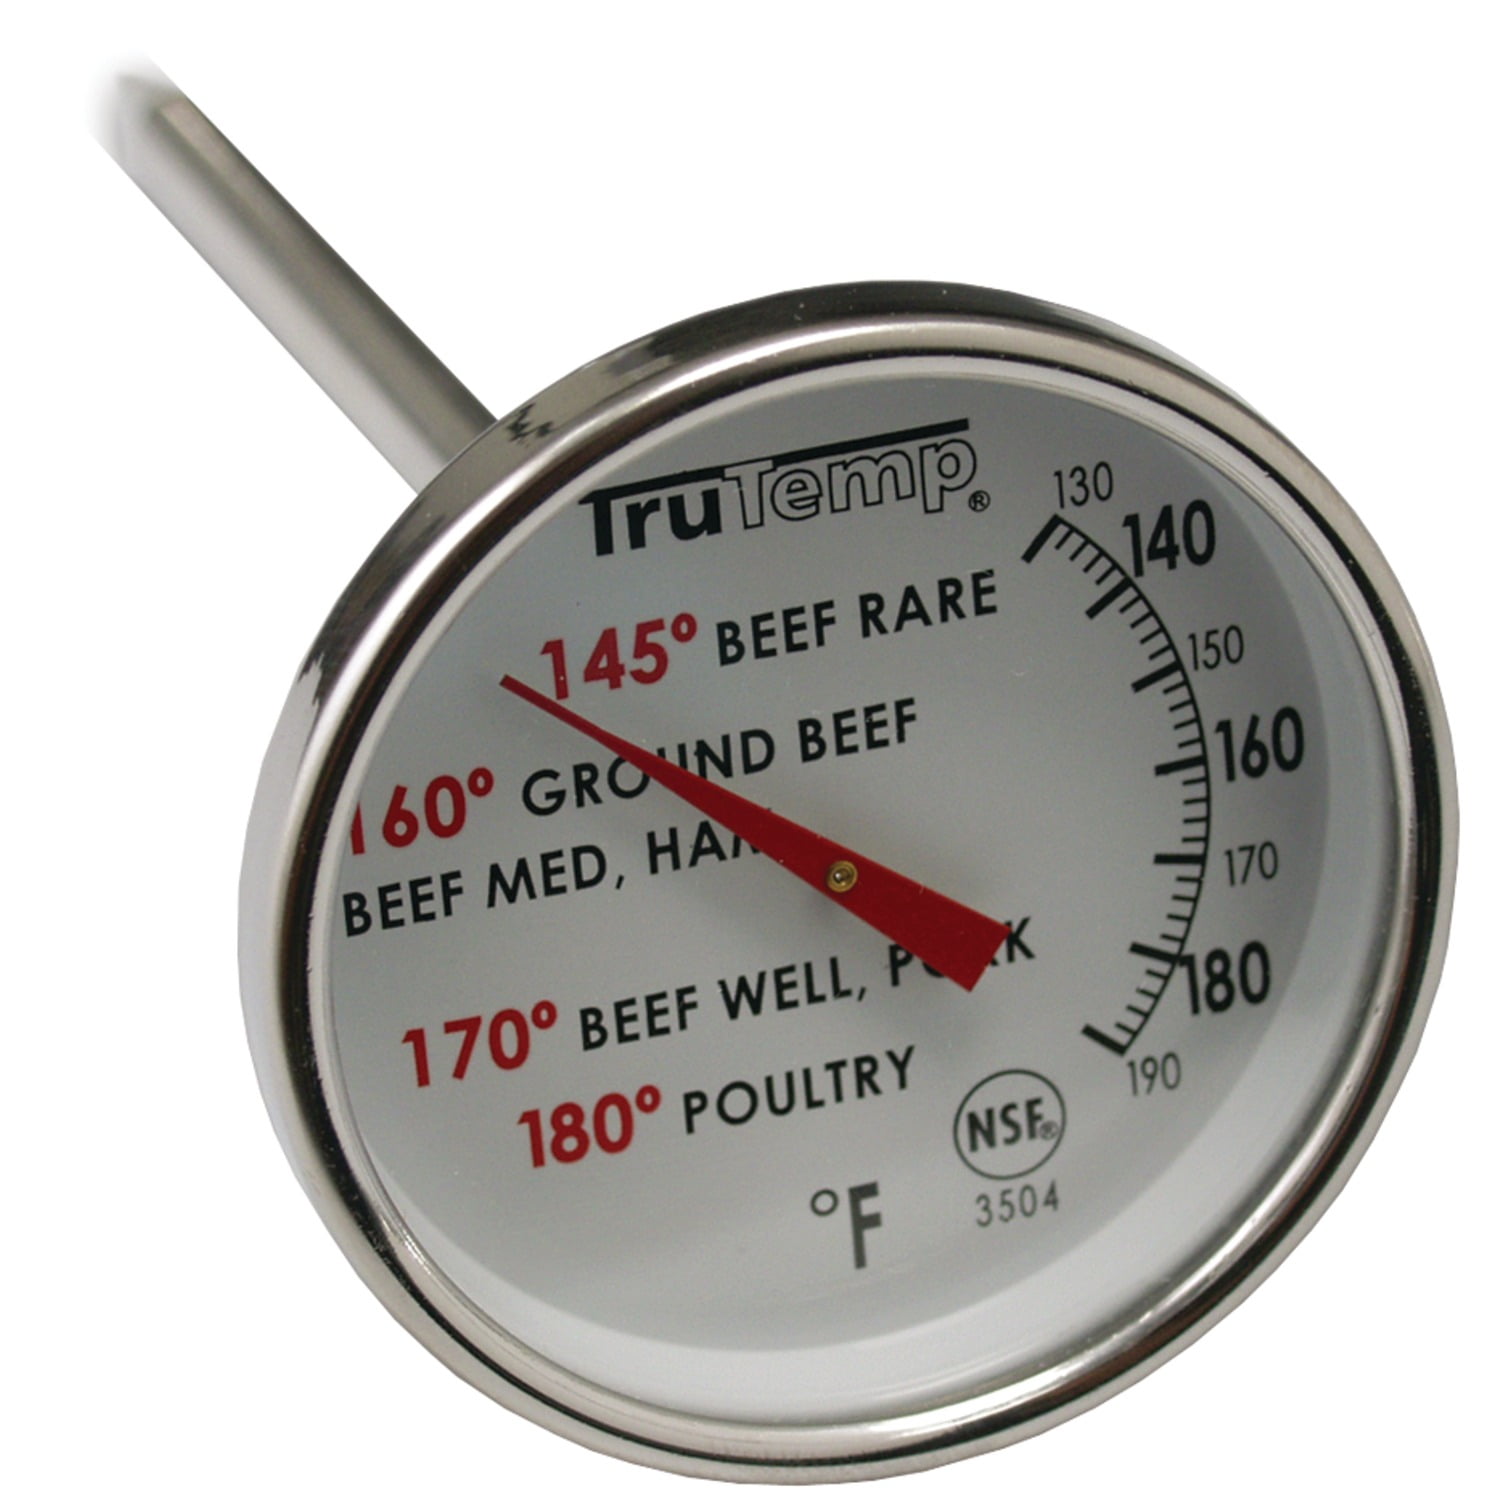 Taylor® Digital Instant Read Pocket Thermometer - Red, 1 ct - City